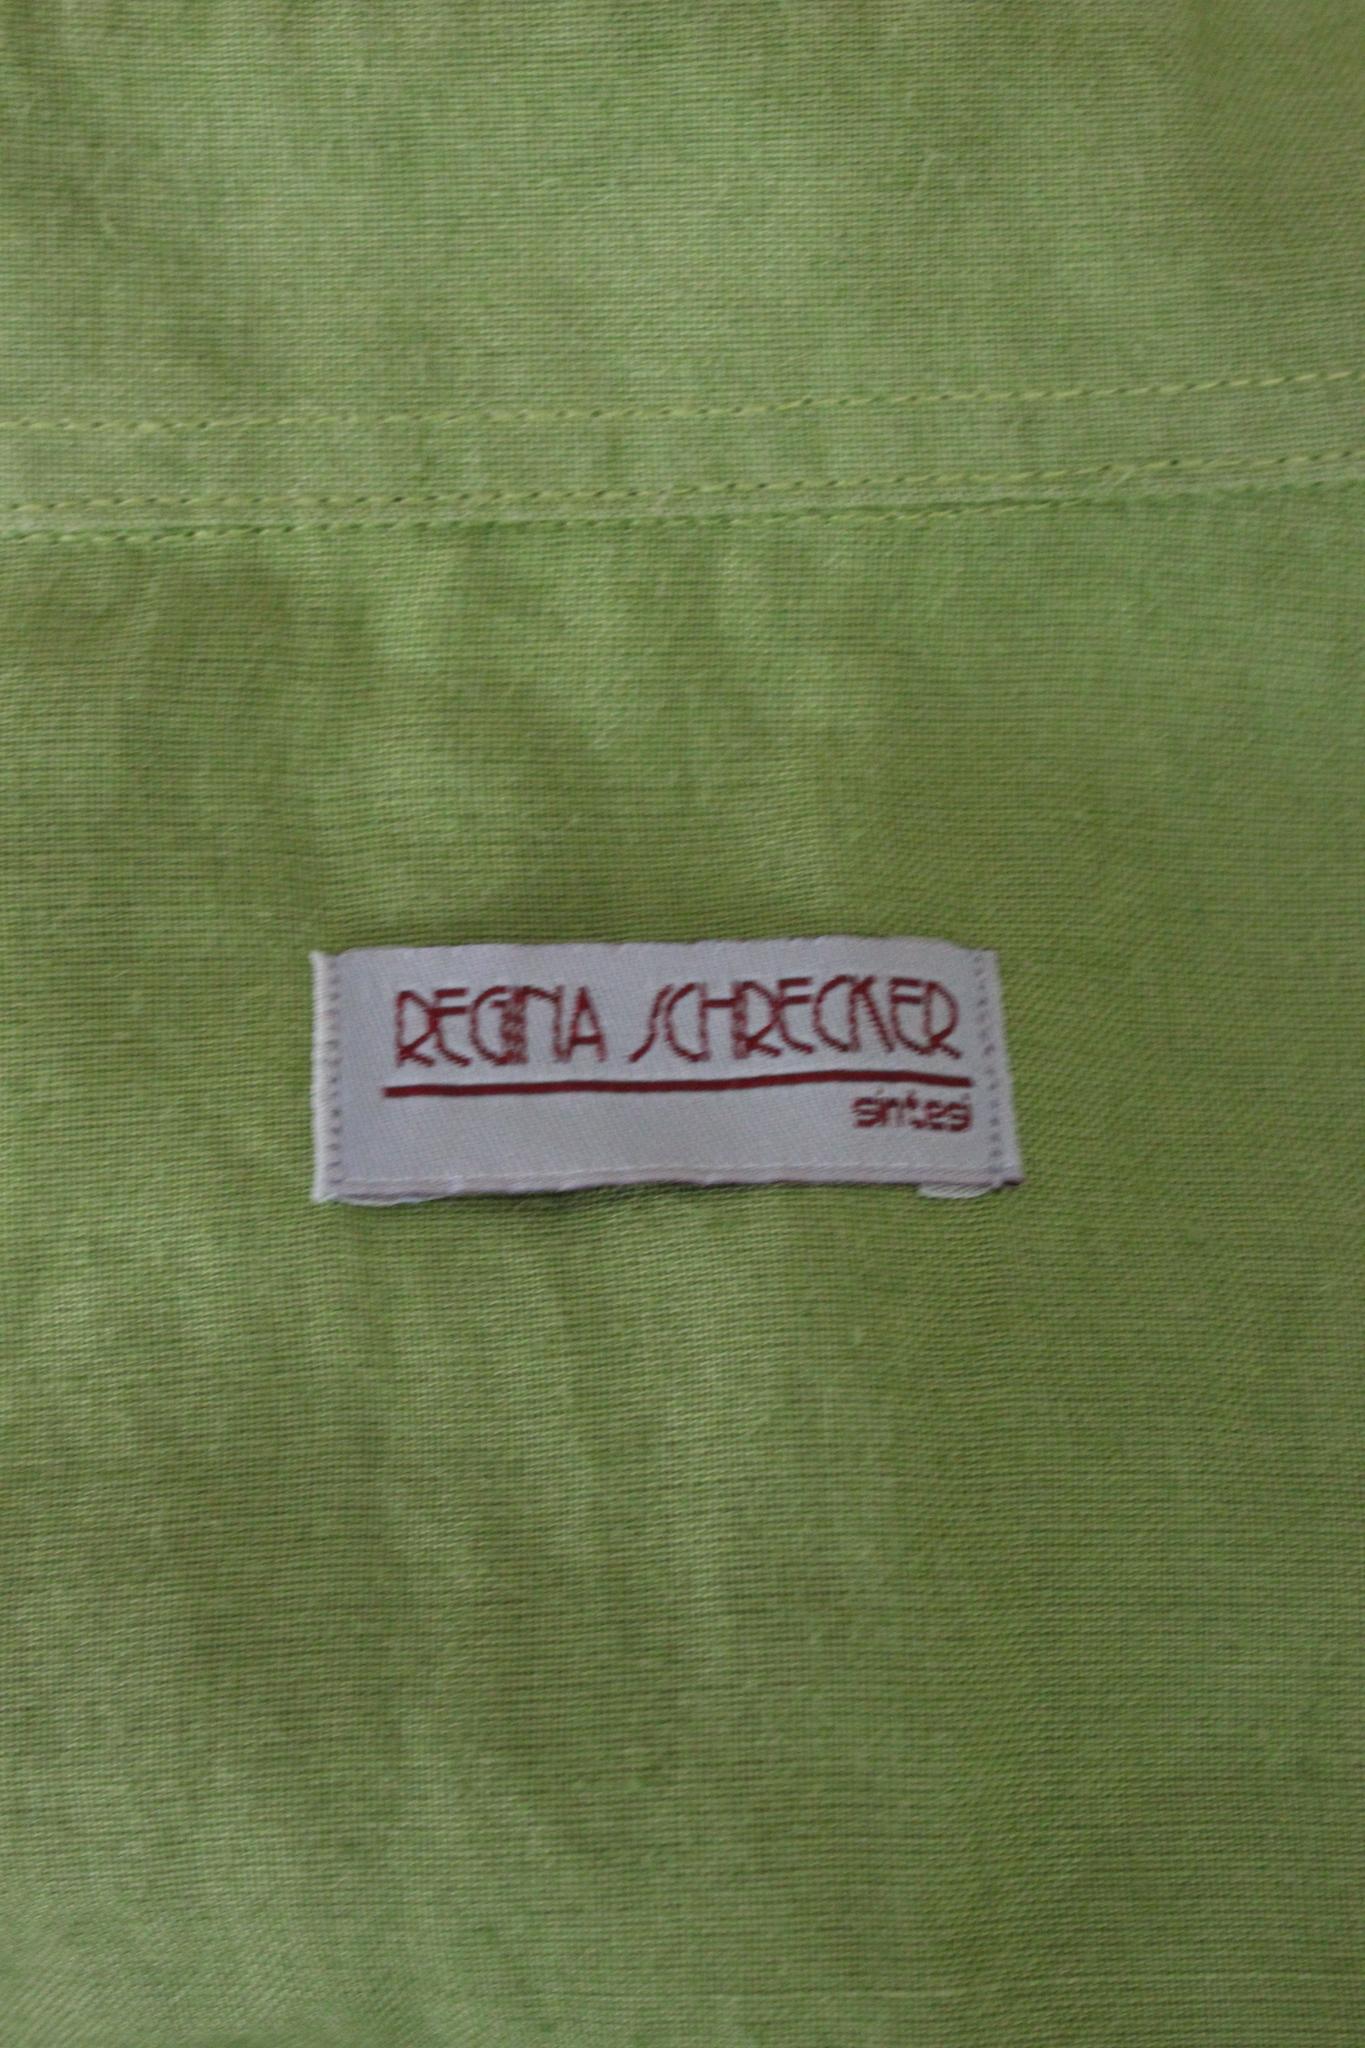 This green Regina Schrecker vintage shirt will make a great addition to any wardrobe. Made with 100% silk-like woven ramie, it offers a soft yet structured feel. The timeless green hue and vintage design make it perfect for any casual